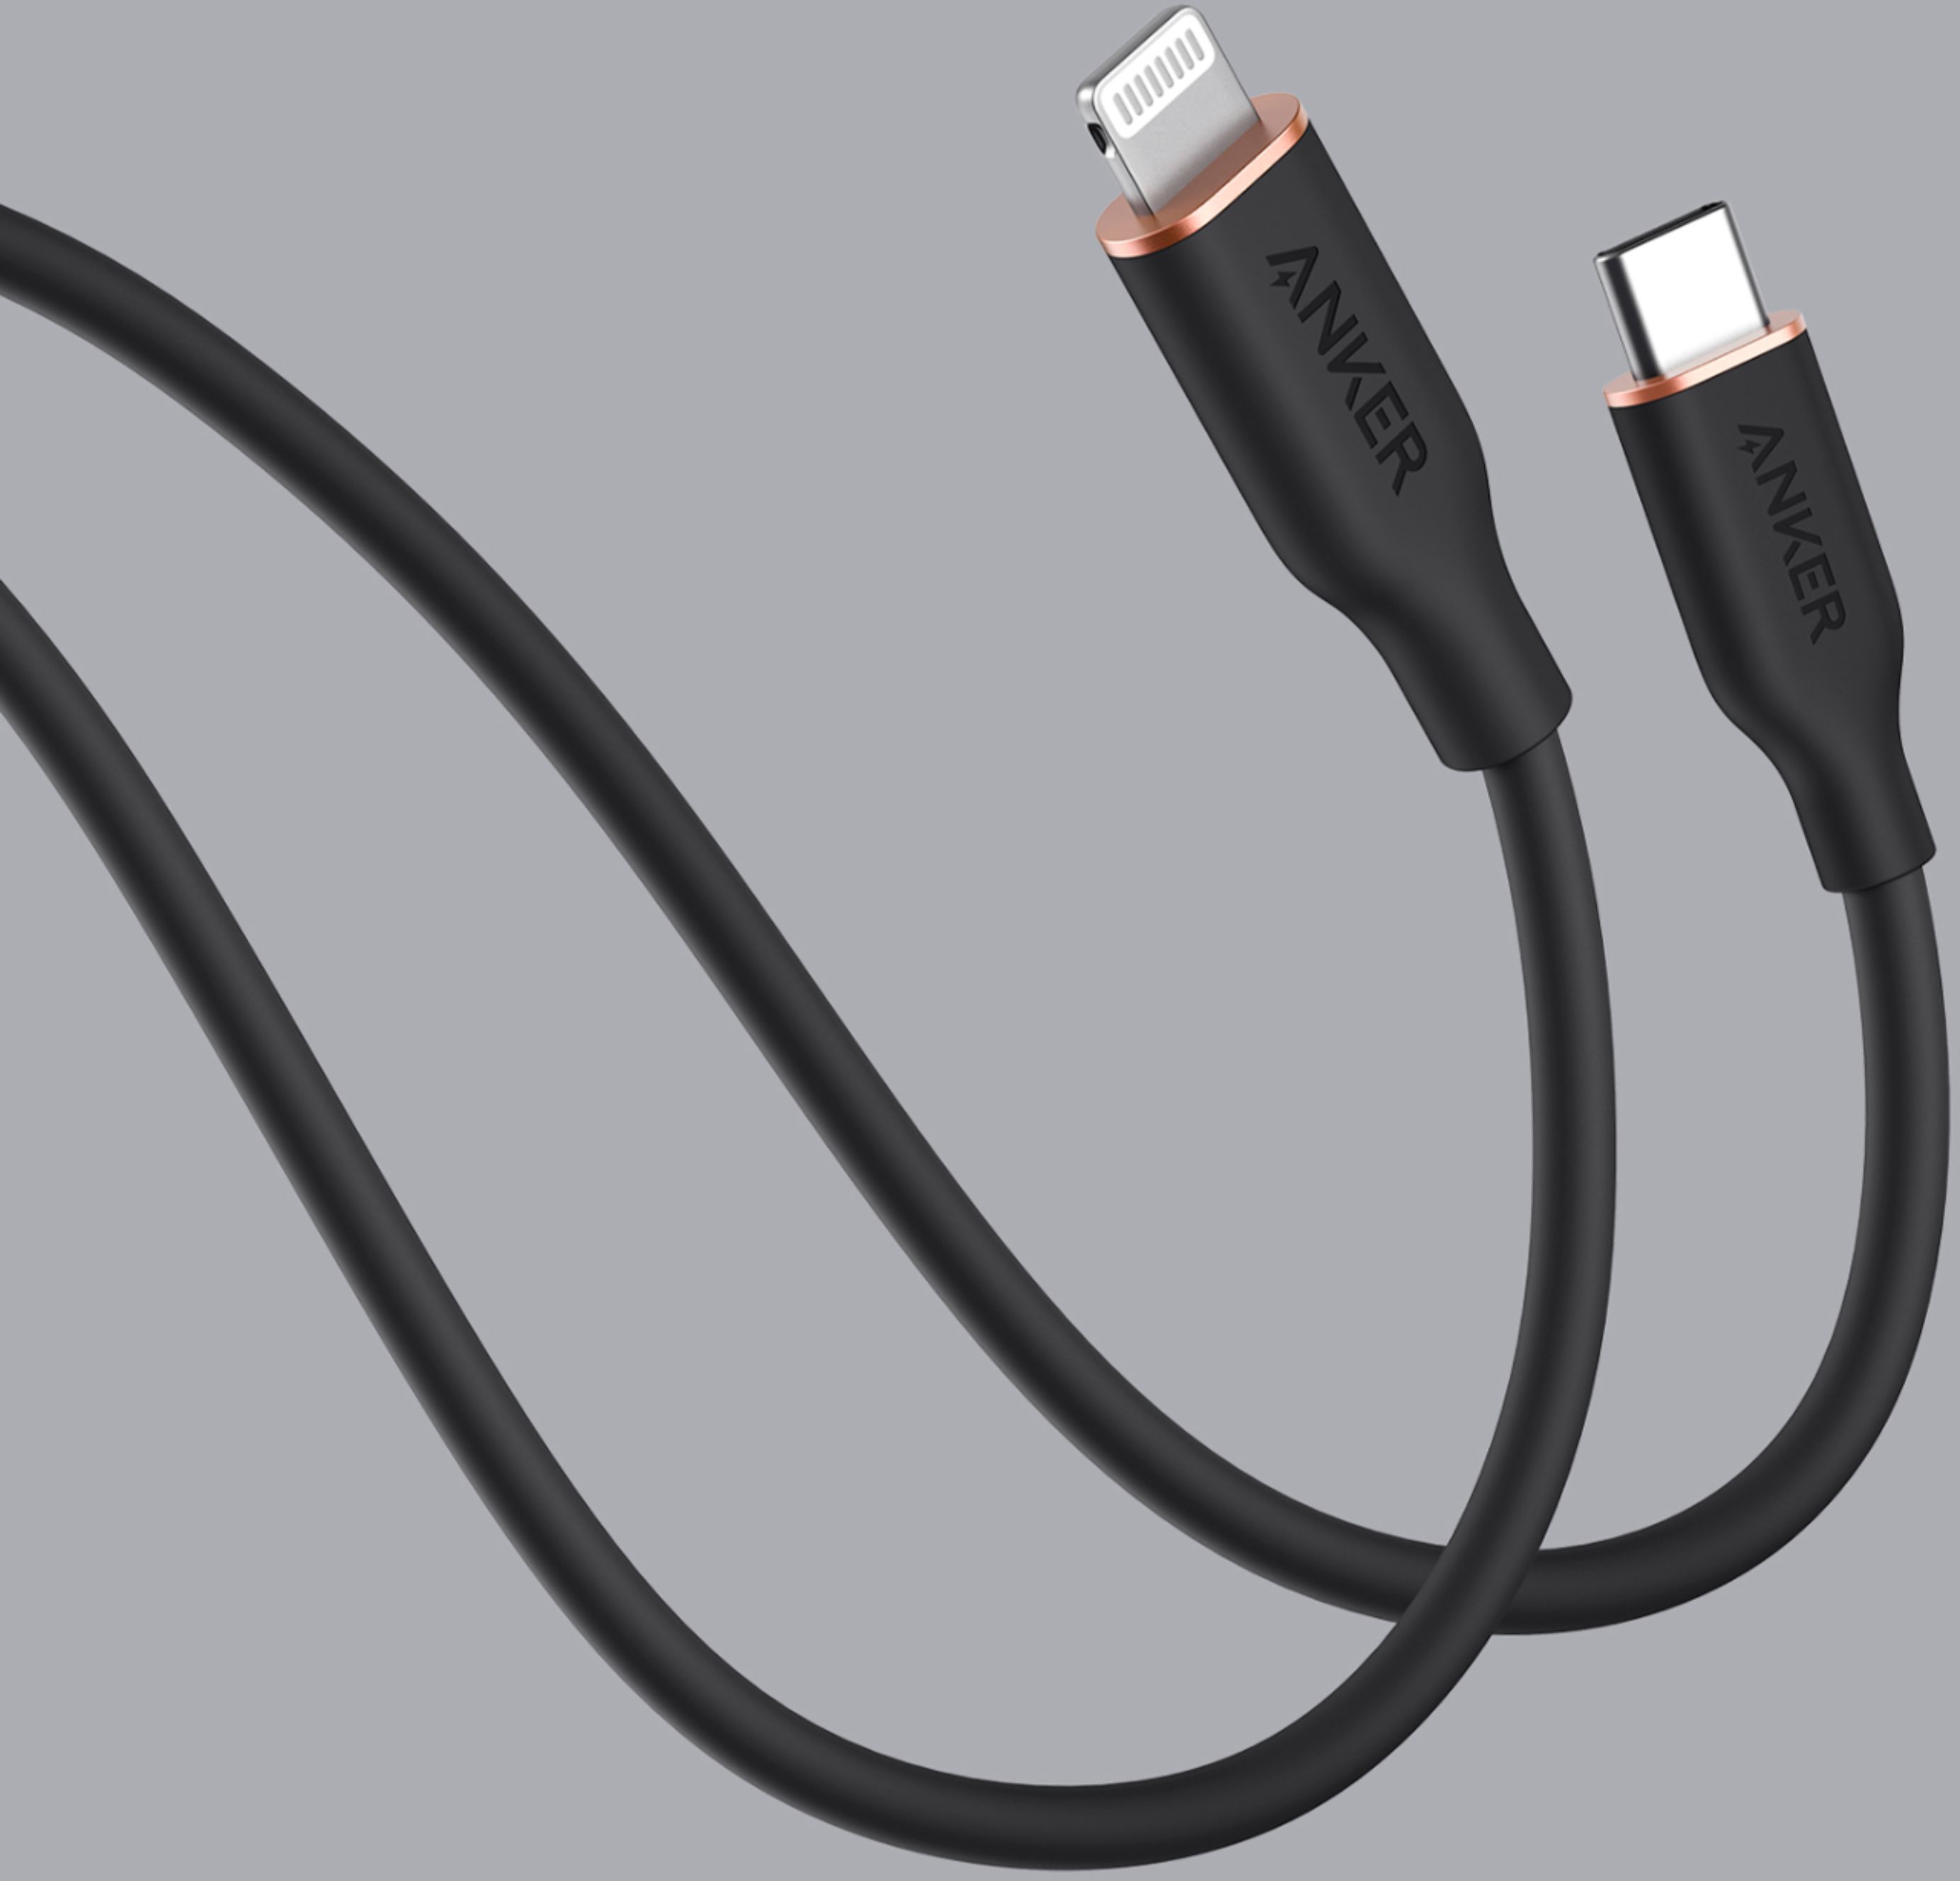  Anker USB-C to Lightning Cable, 641 Cable (Midnight